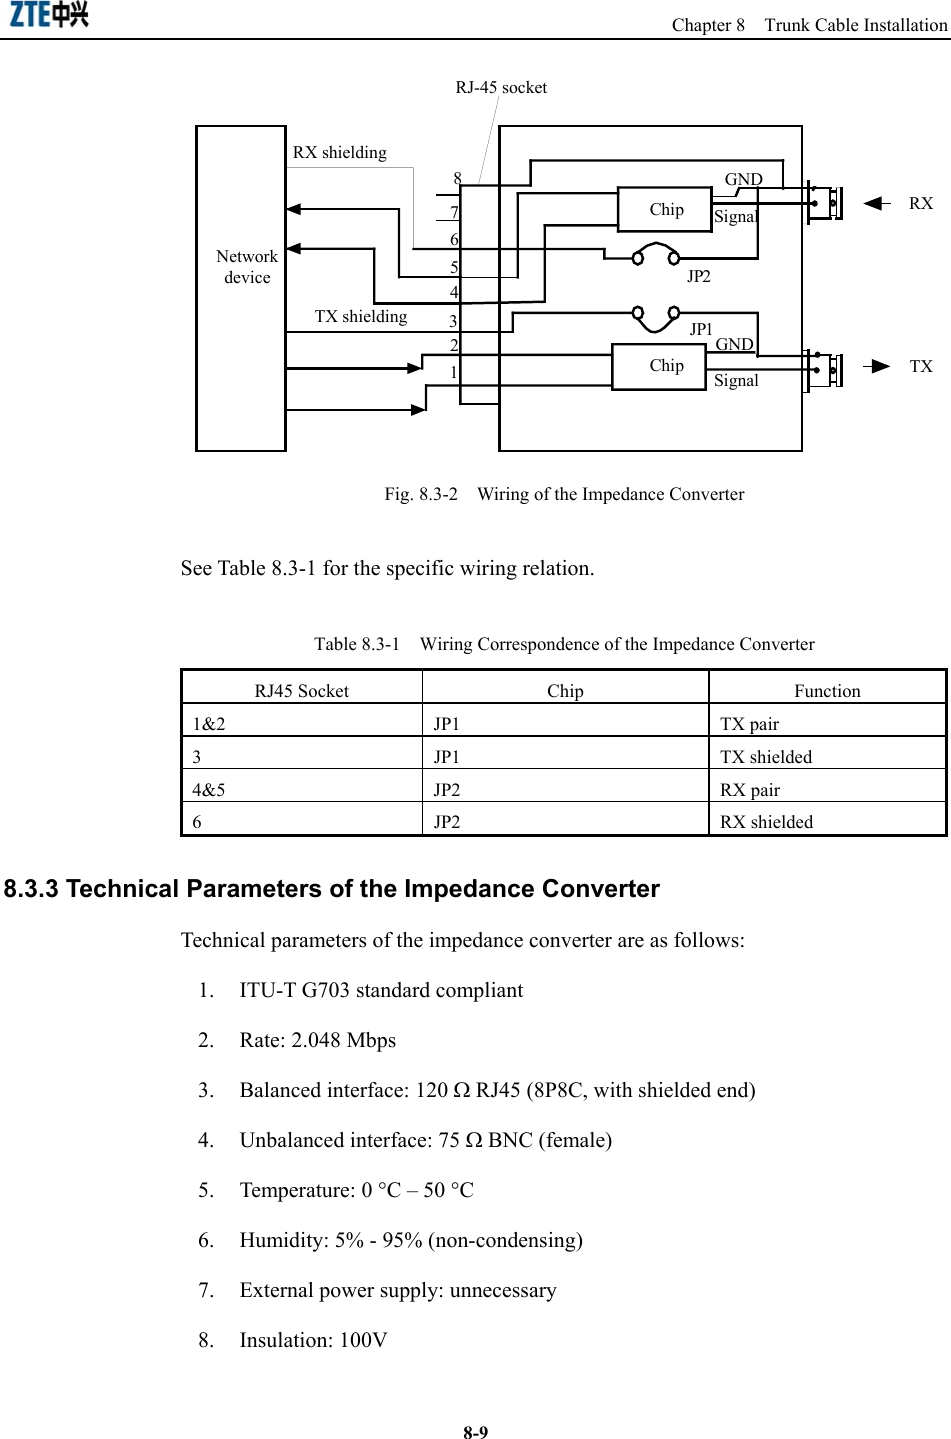                                                               Chapter 8  Trunk Cable Installation  8-9ChipChipNetwork device21435RJ-45 socketRX shielding876JP1GNDSignalJP2SignalGNDTXRXTX shielding Fig. 8.3-2    Wiring of the Impedance Converter   See Table 8.3-1 for the specific wiring relation. Table 8.3-1    Wiring Correspondence of the Impedance Converter RJ45 Socket  Chip  Function 1&amp;2 JP1  TX pair 3 JP1  TX shielded 4&amp;5 JP2  RX pair 6 JP2  RX shielded 8.3.3 Technical Parameters of the Impedance Converter Technical parameters of the impedance converter are as follows: 1.  ITU-T G703 standard compliant 2.  Rate: 2.048 Mbps 3.  Balanced interface: 120 Ω RJ45 (8P8C, with shielded end) 4.  Unbalanced interface: 75 Ω BNC (female) 5.  Temperature: 0 °C – 50 °C 6.  Humidity: 5% - 95% (non-condensing) 7.  External power supply: unnecessary 8. Insulation: 100V   